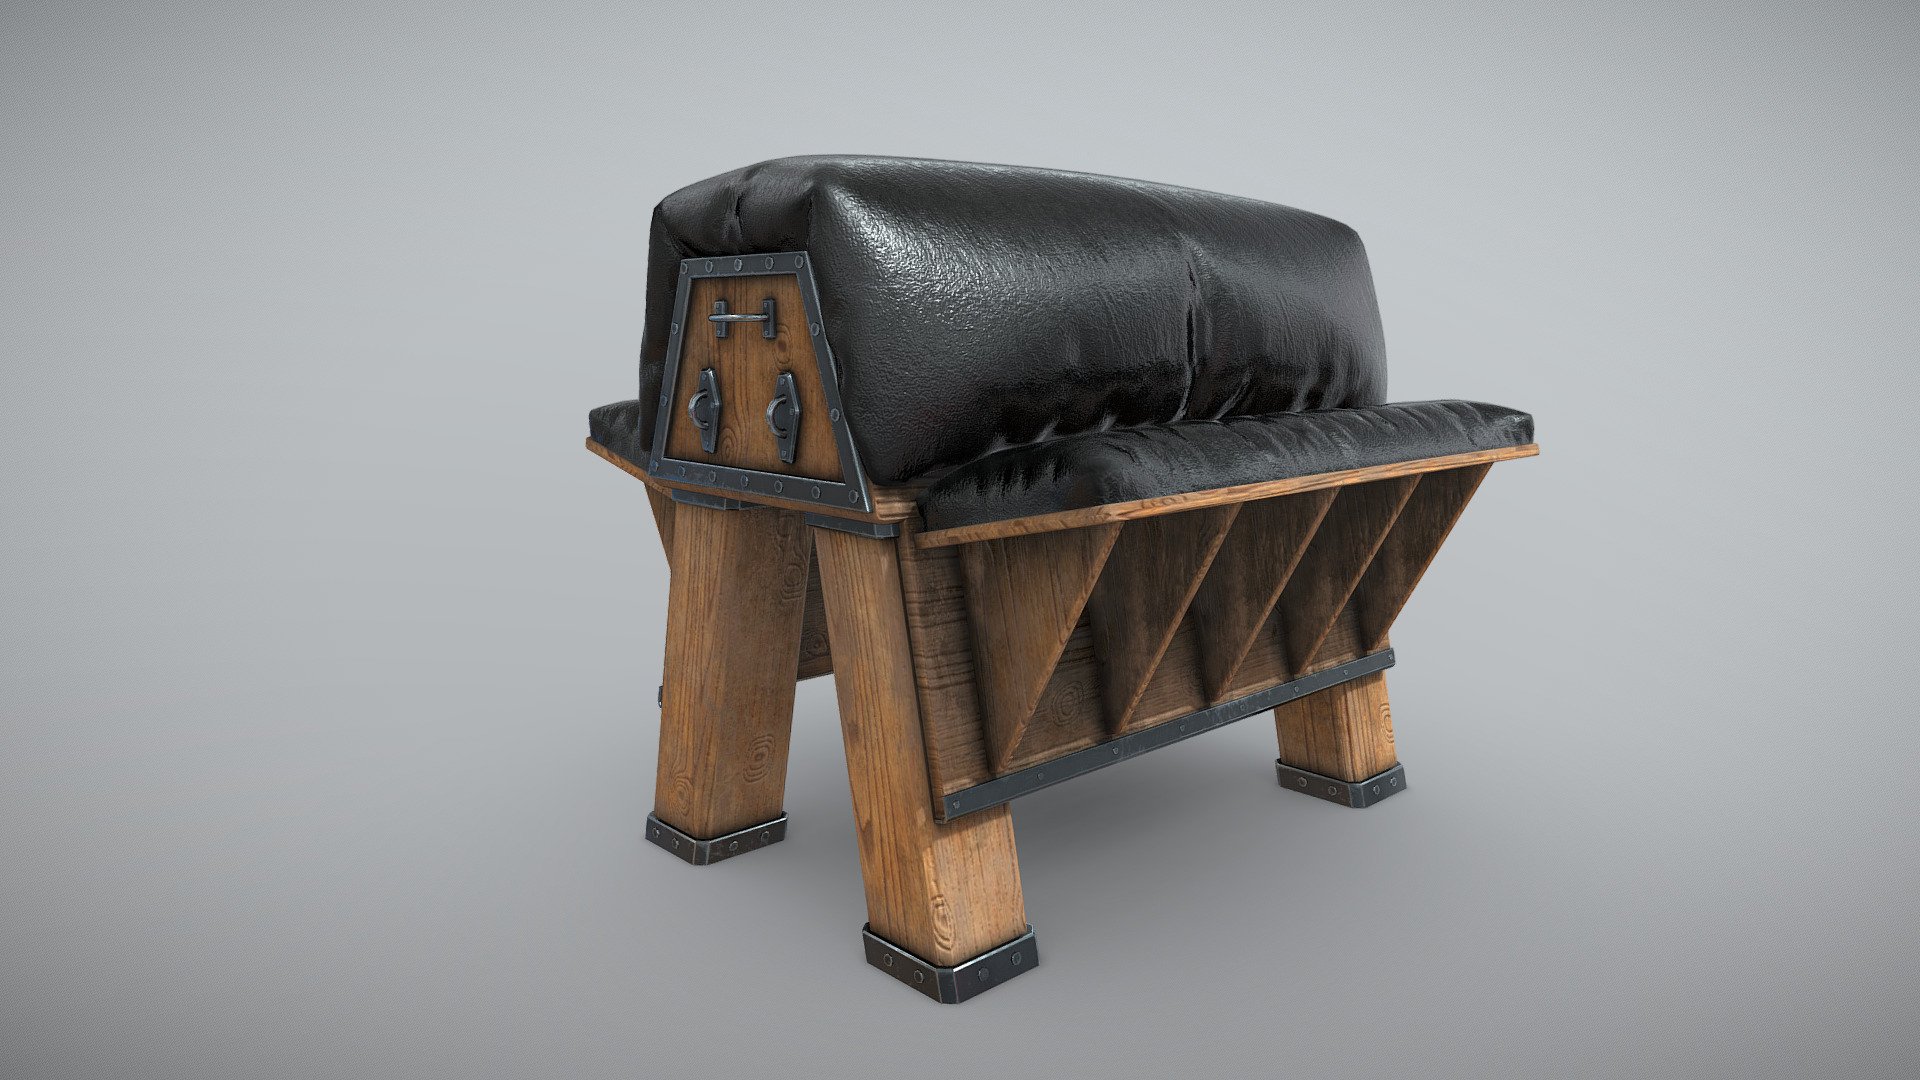 BDSM Horse

I made this piece of furniture in Blender 3.1 and  textured it in Substance Painter.

3x 2k material slots 3d model